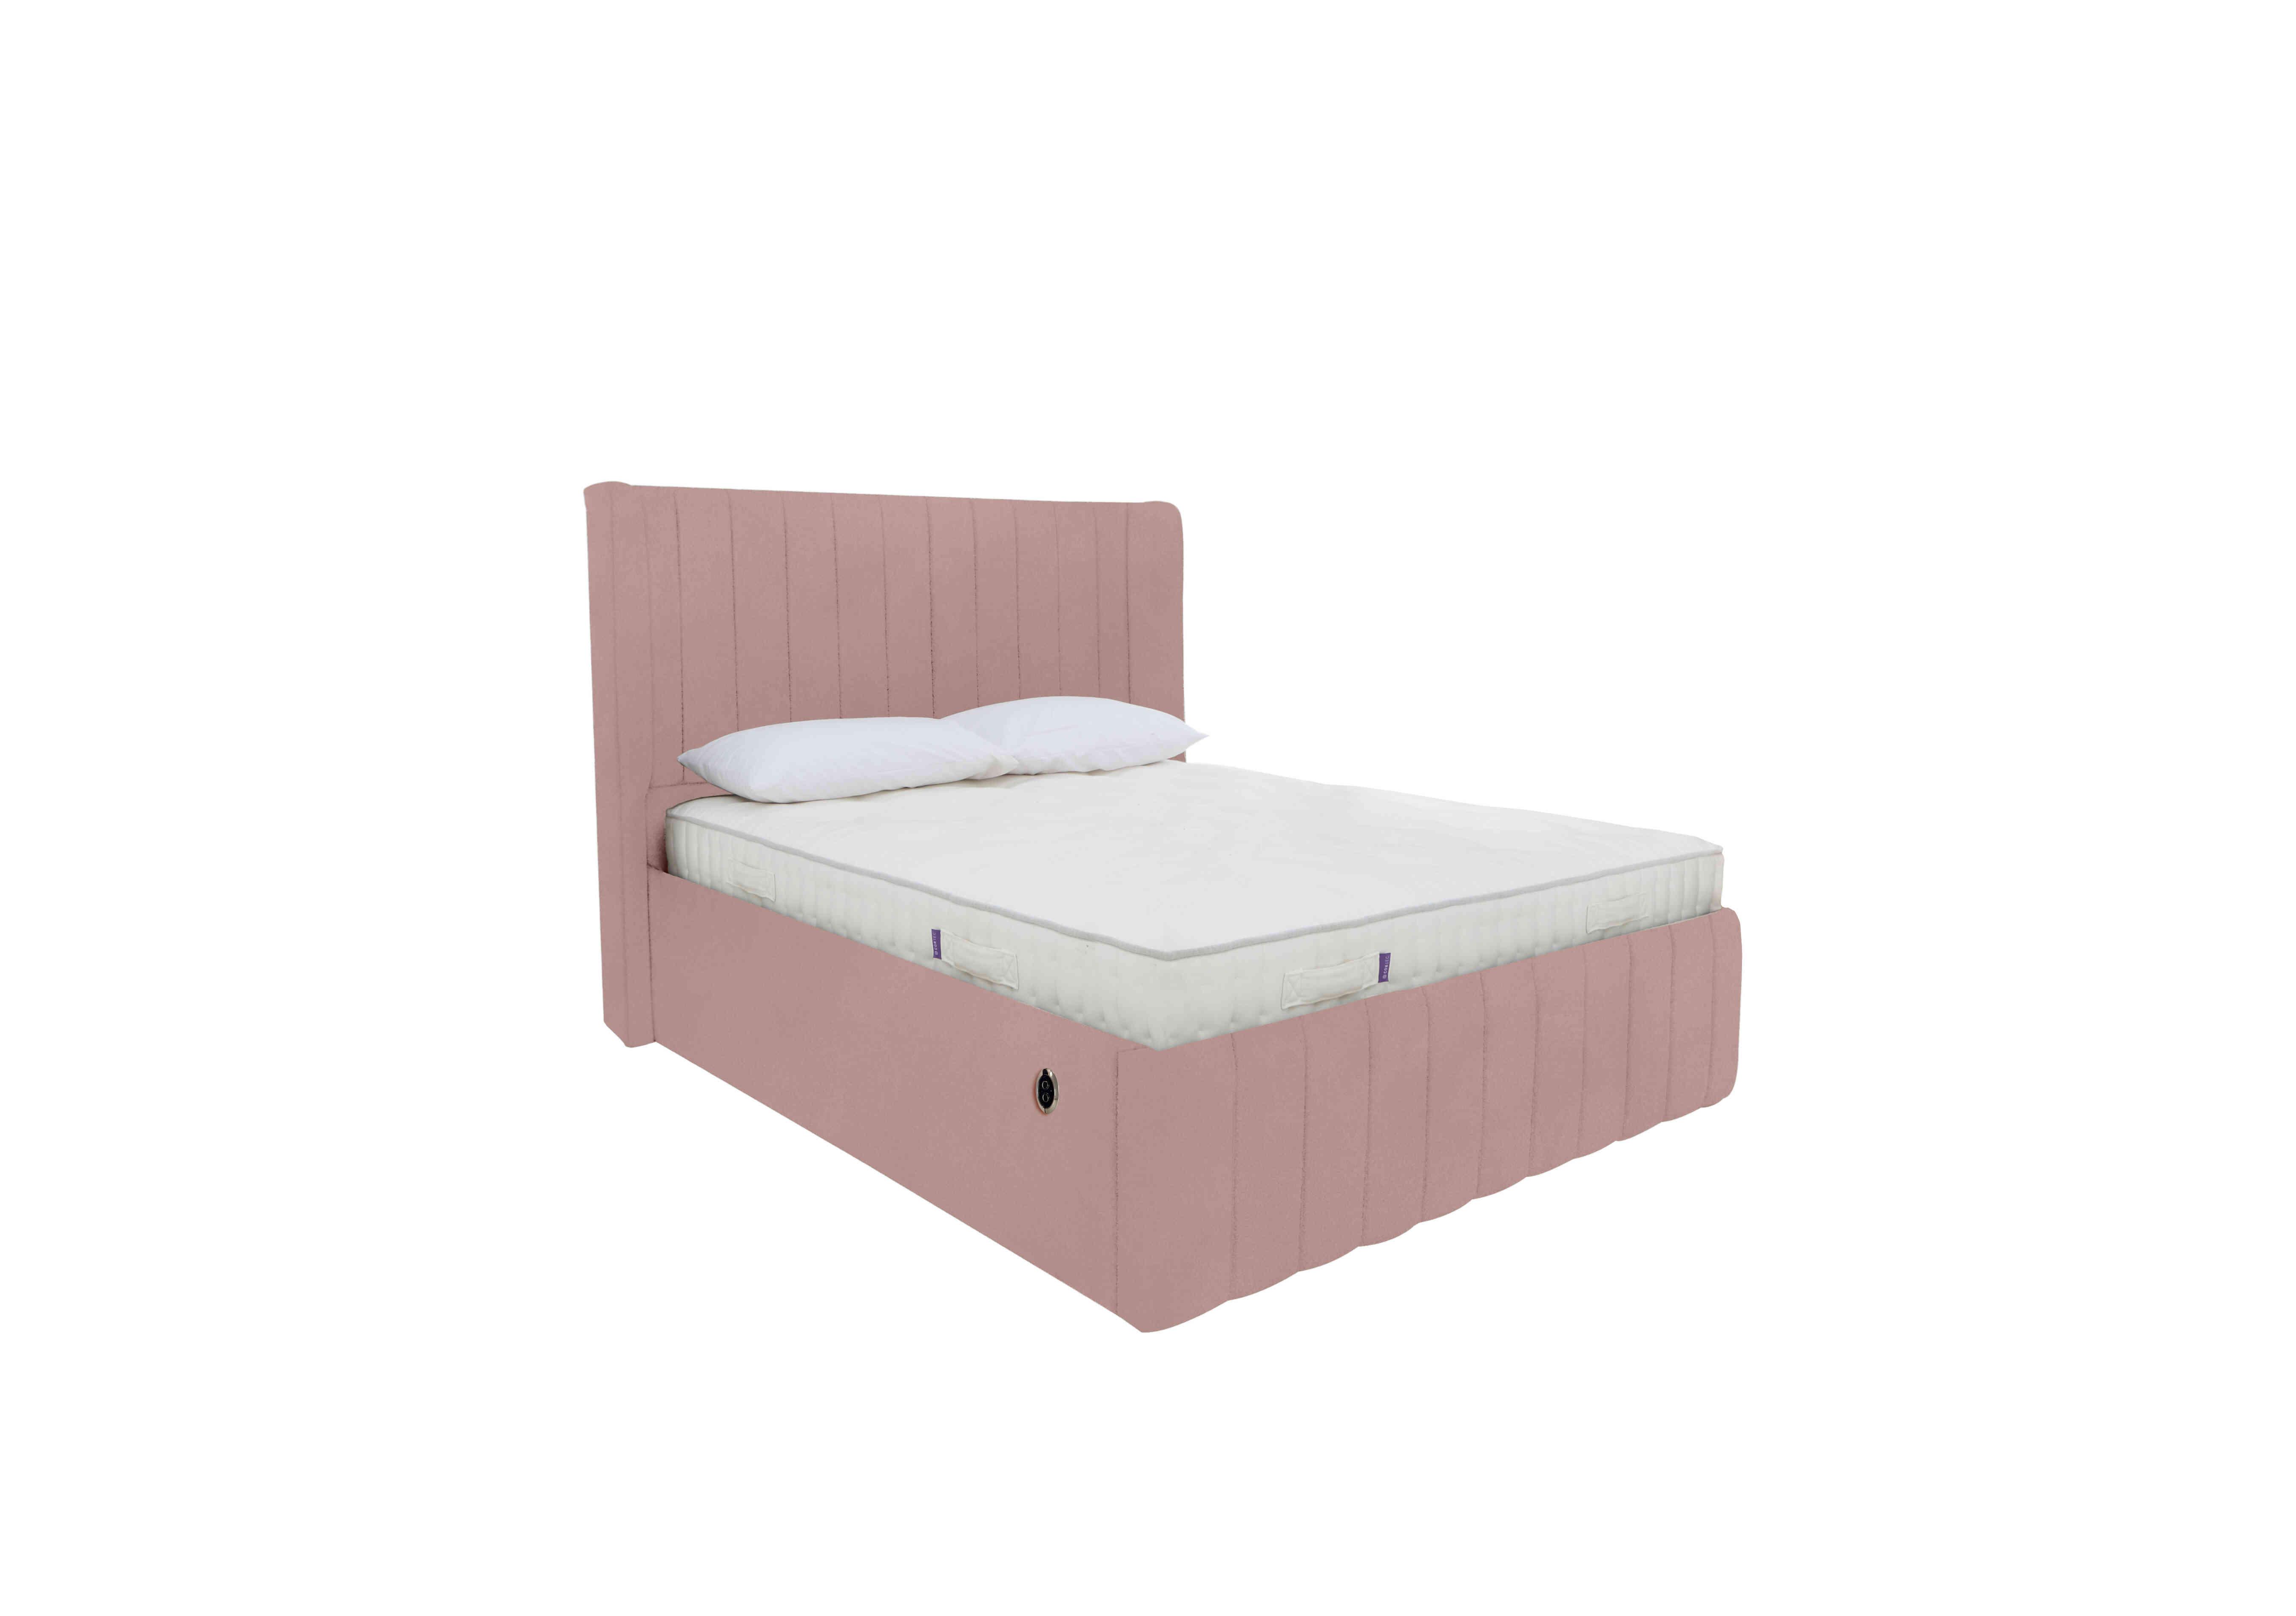 Eira Low Foot End Electric Ottoman Bed Frame in Sanderson English Garden on Furniture Village